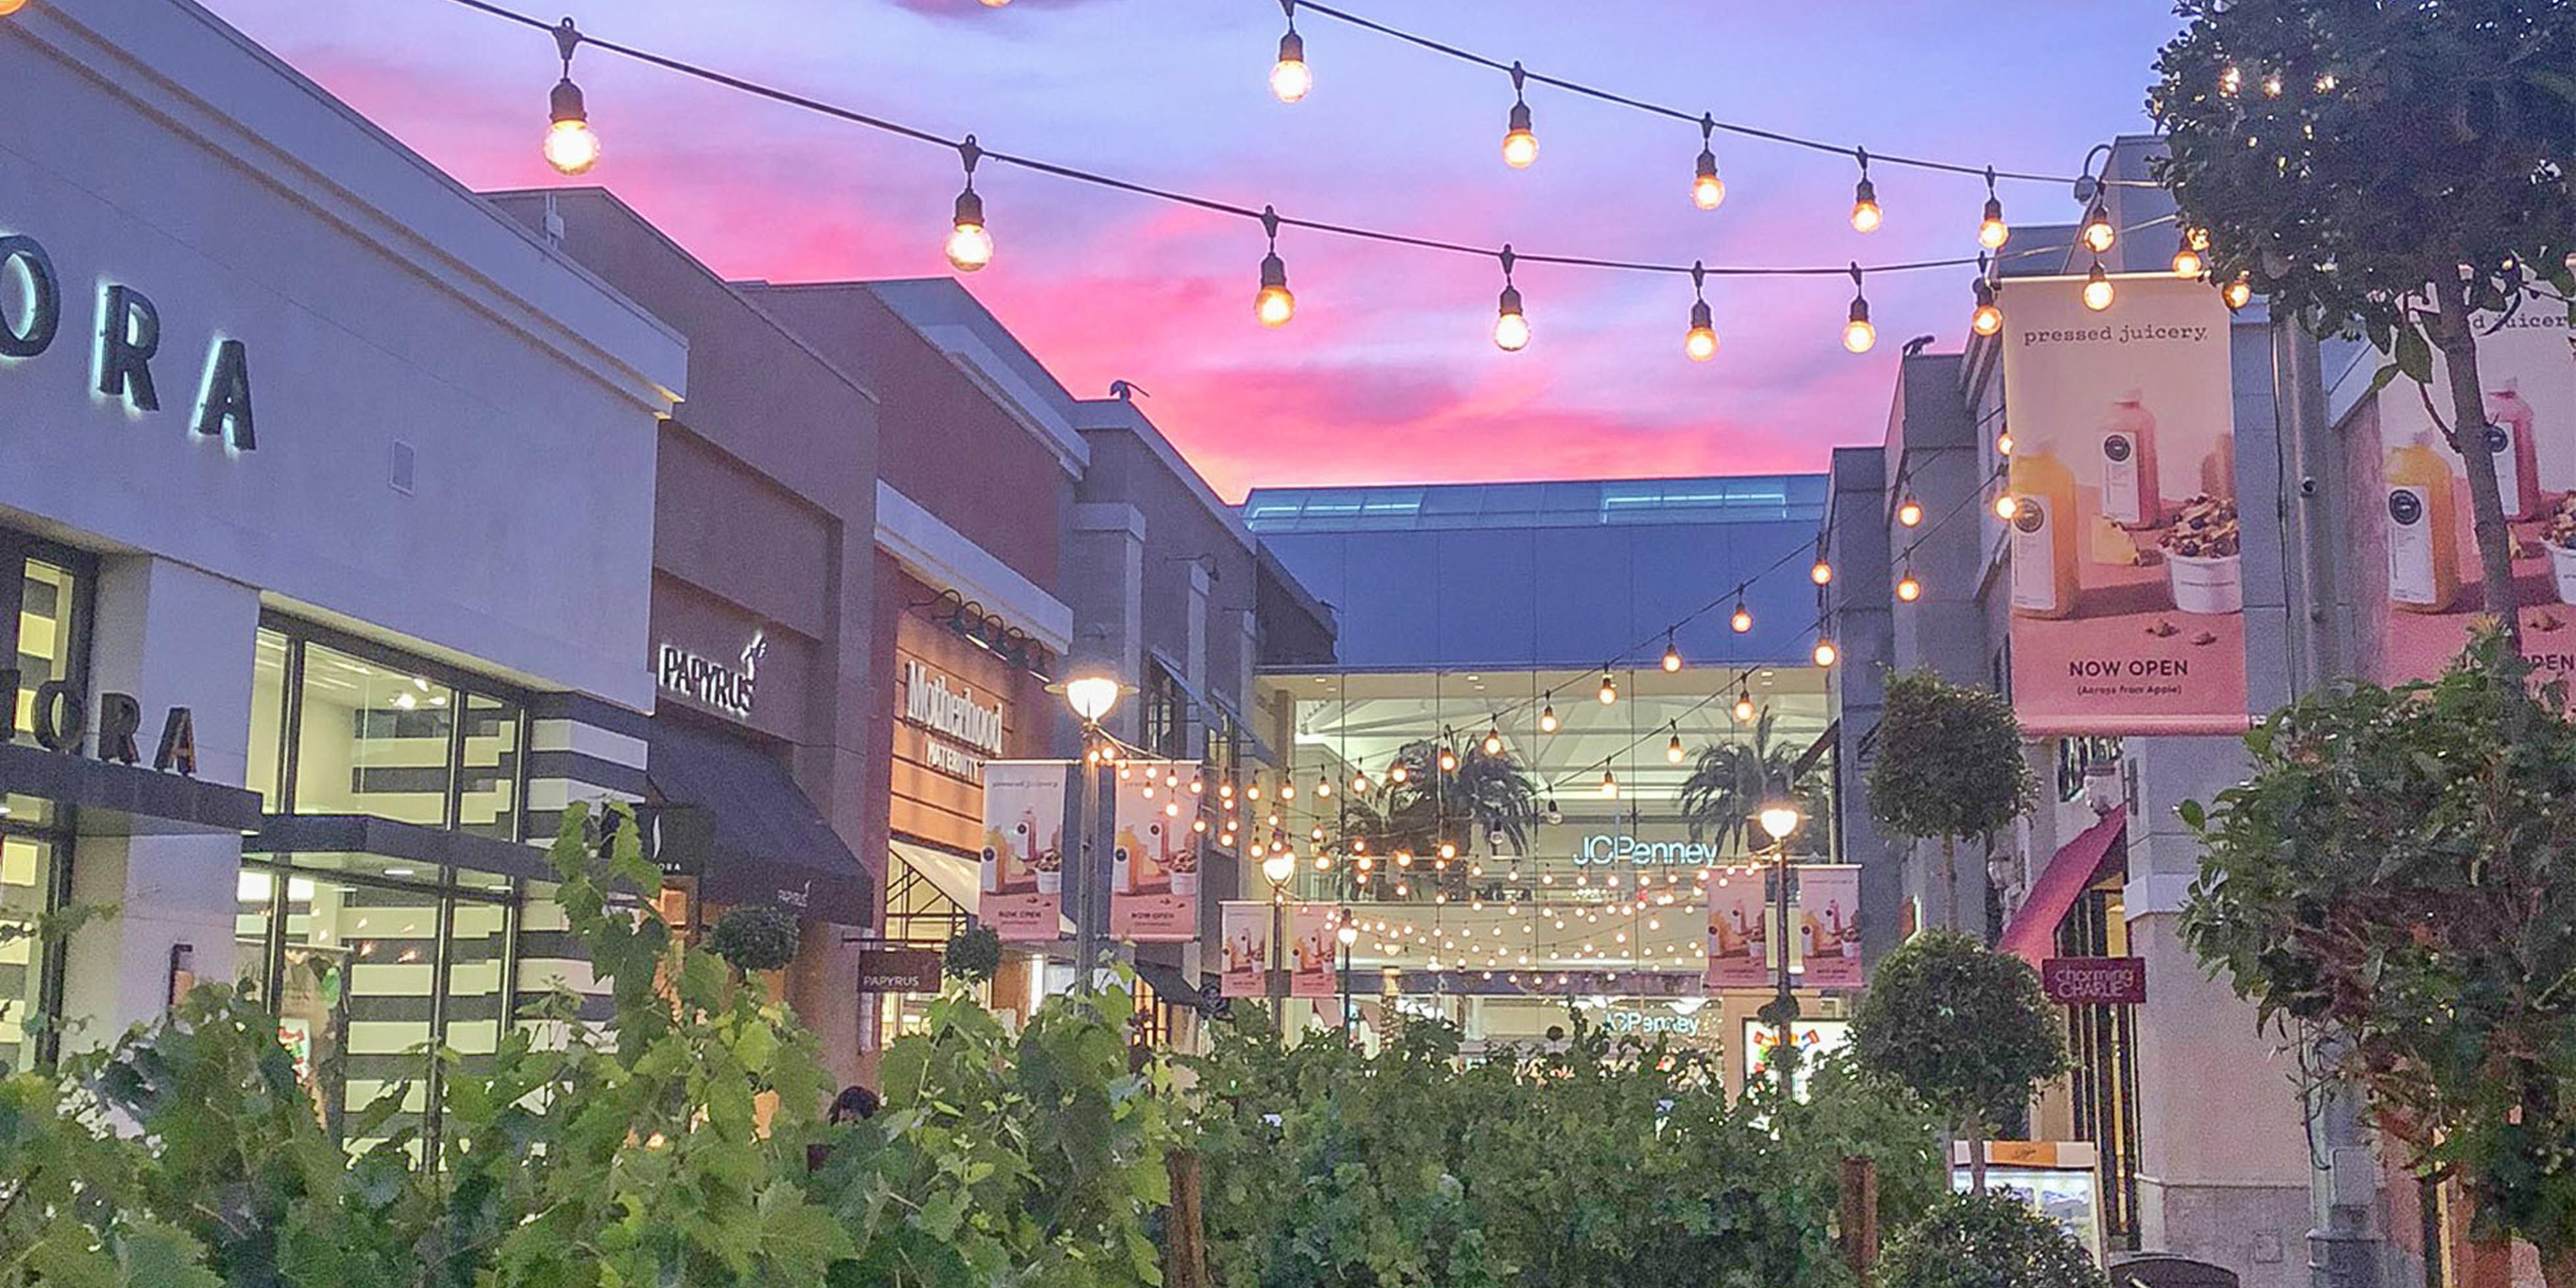 Spend an afternoon shopping at the indoor outdoor mall.  Surrounded by many restaurants and a movie theater.